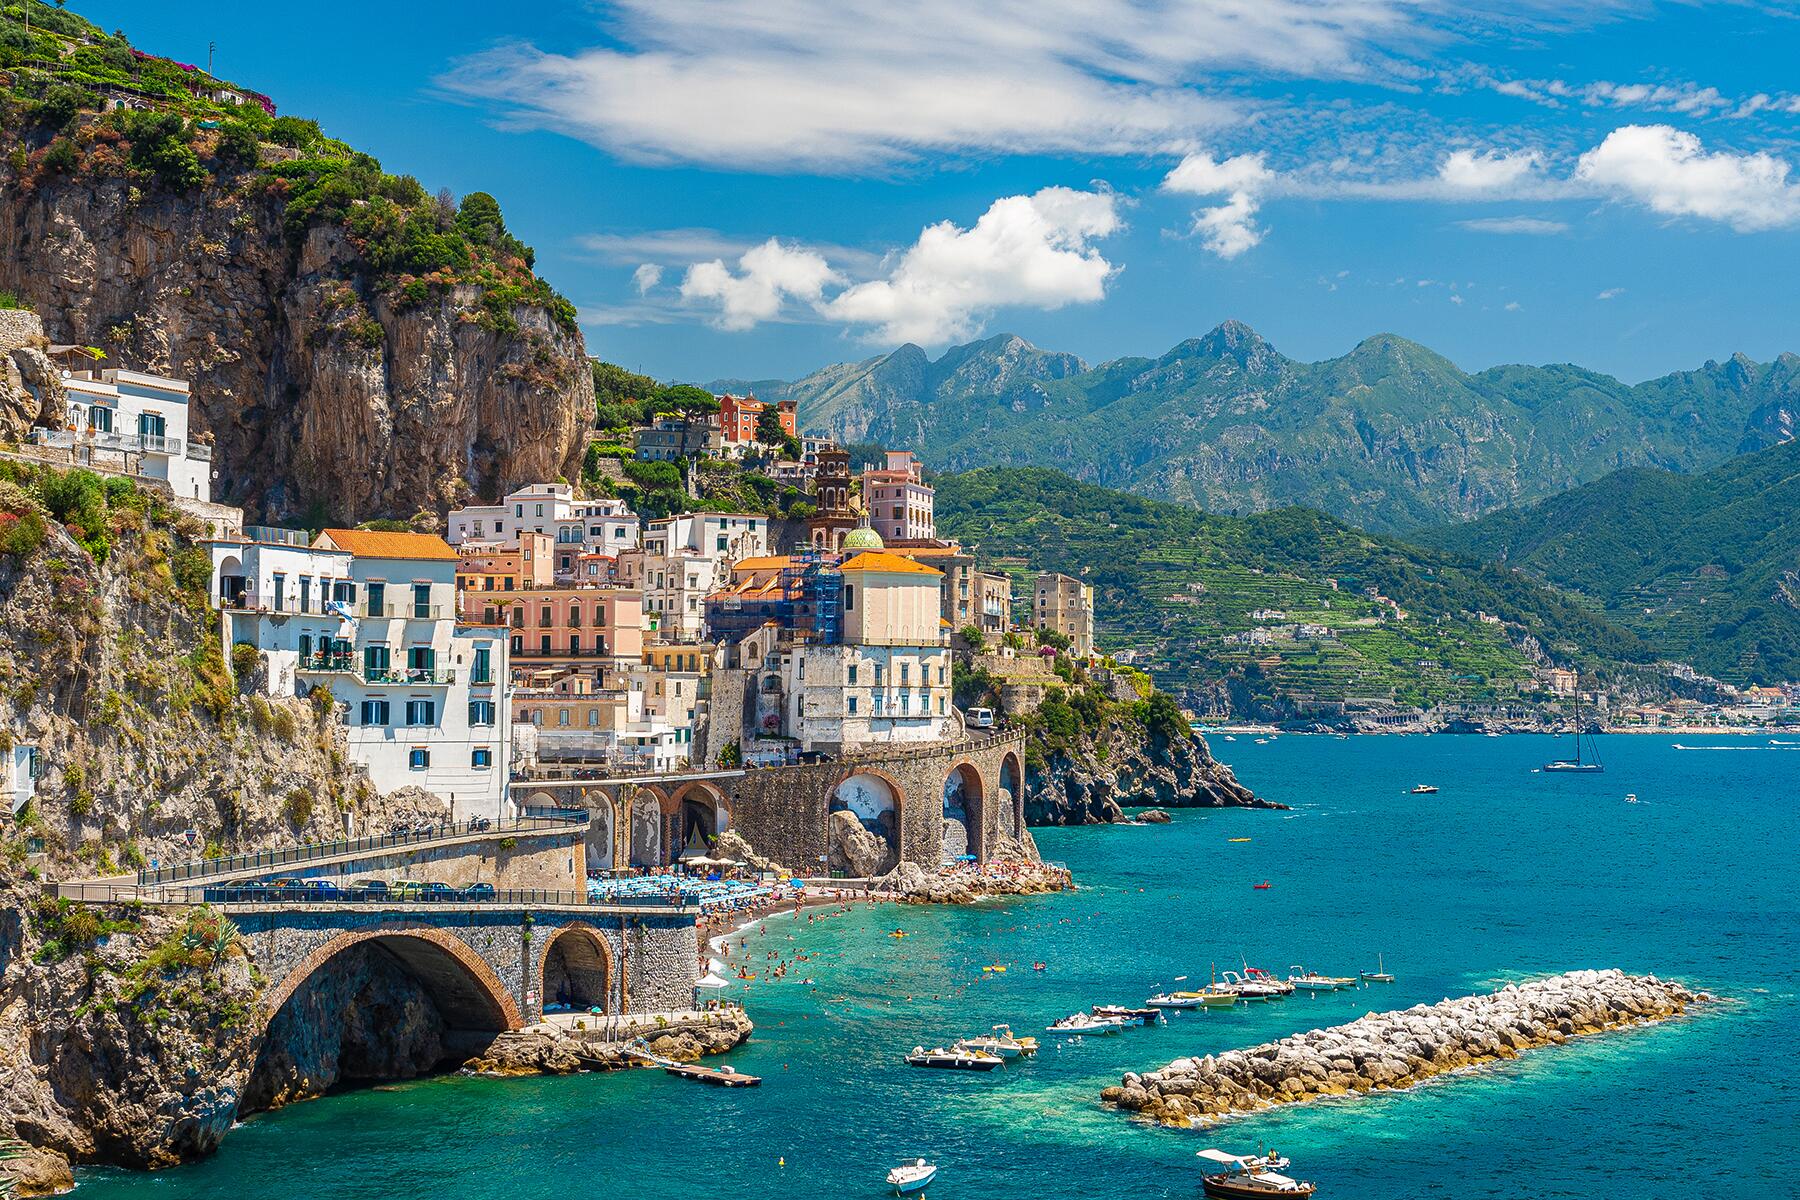 A day in Amalfi - Buyourtour